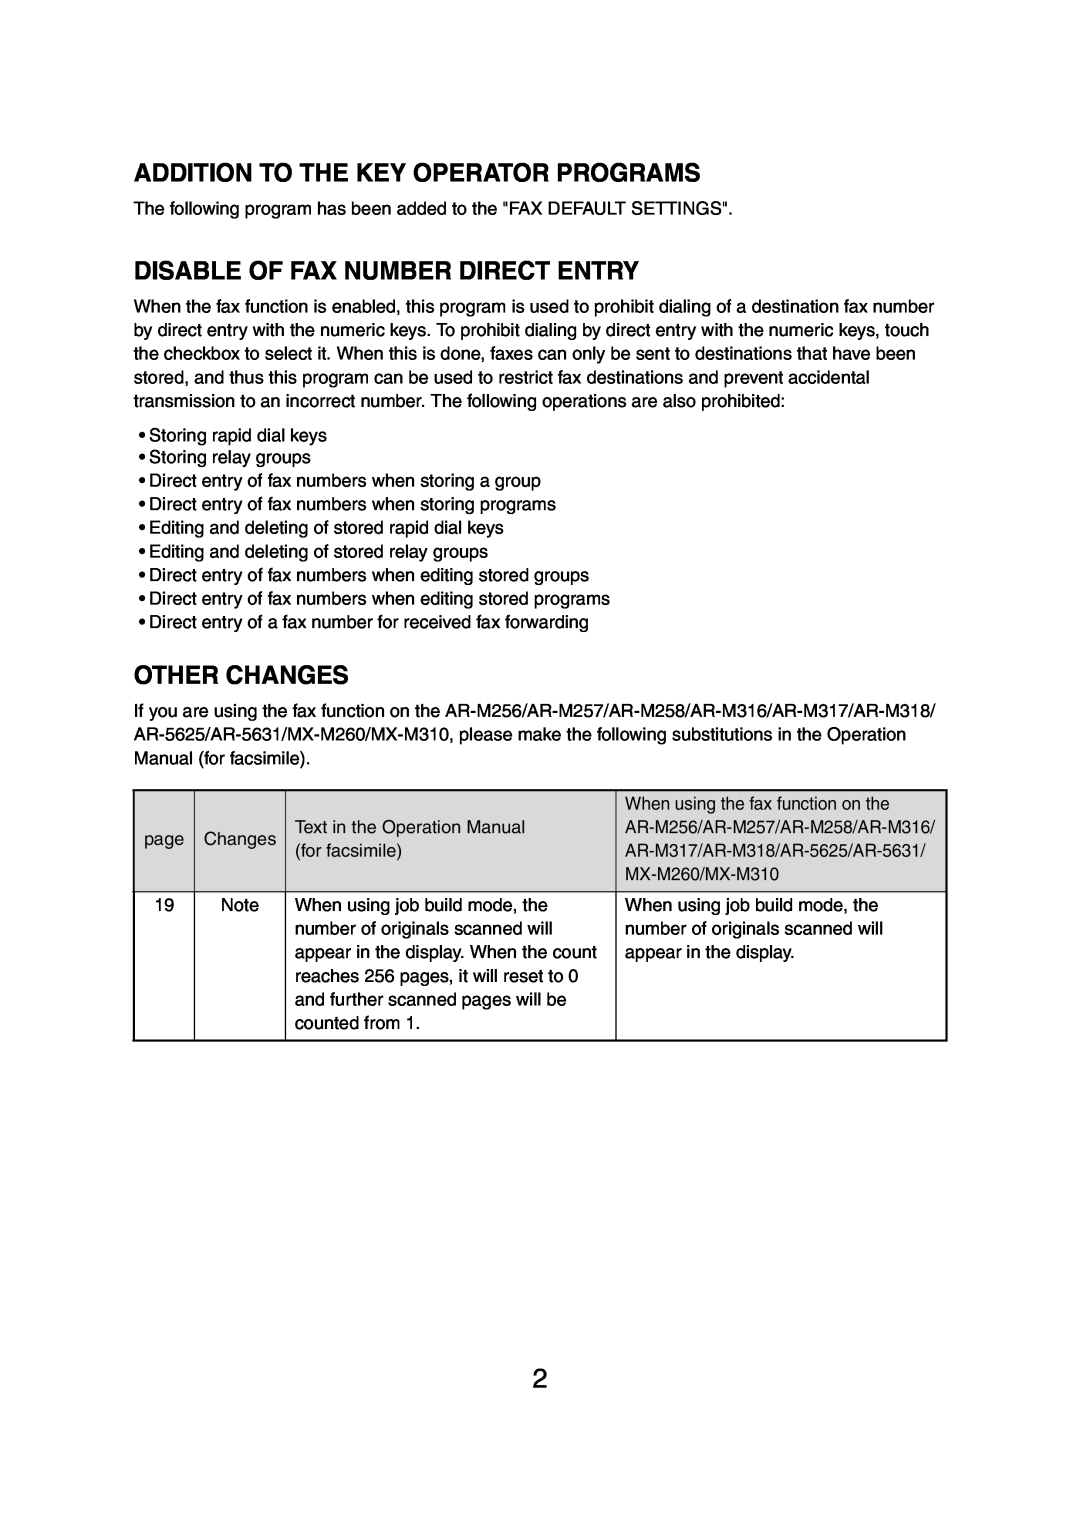 Sharp AR-M257 operation manual Addition To The Key Operator Programs, Disable Of Fax Number Direct Entry, Other Changes 